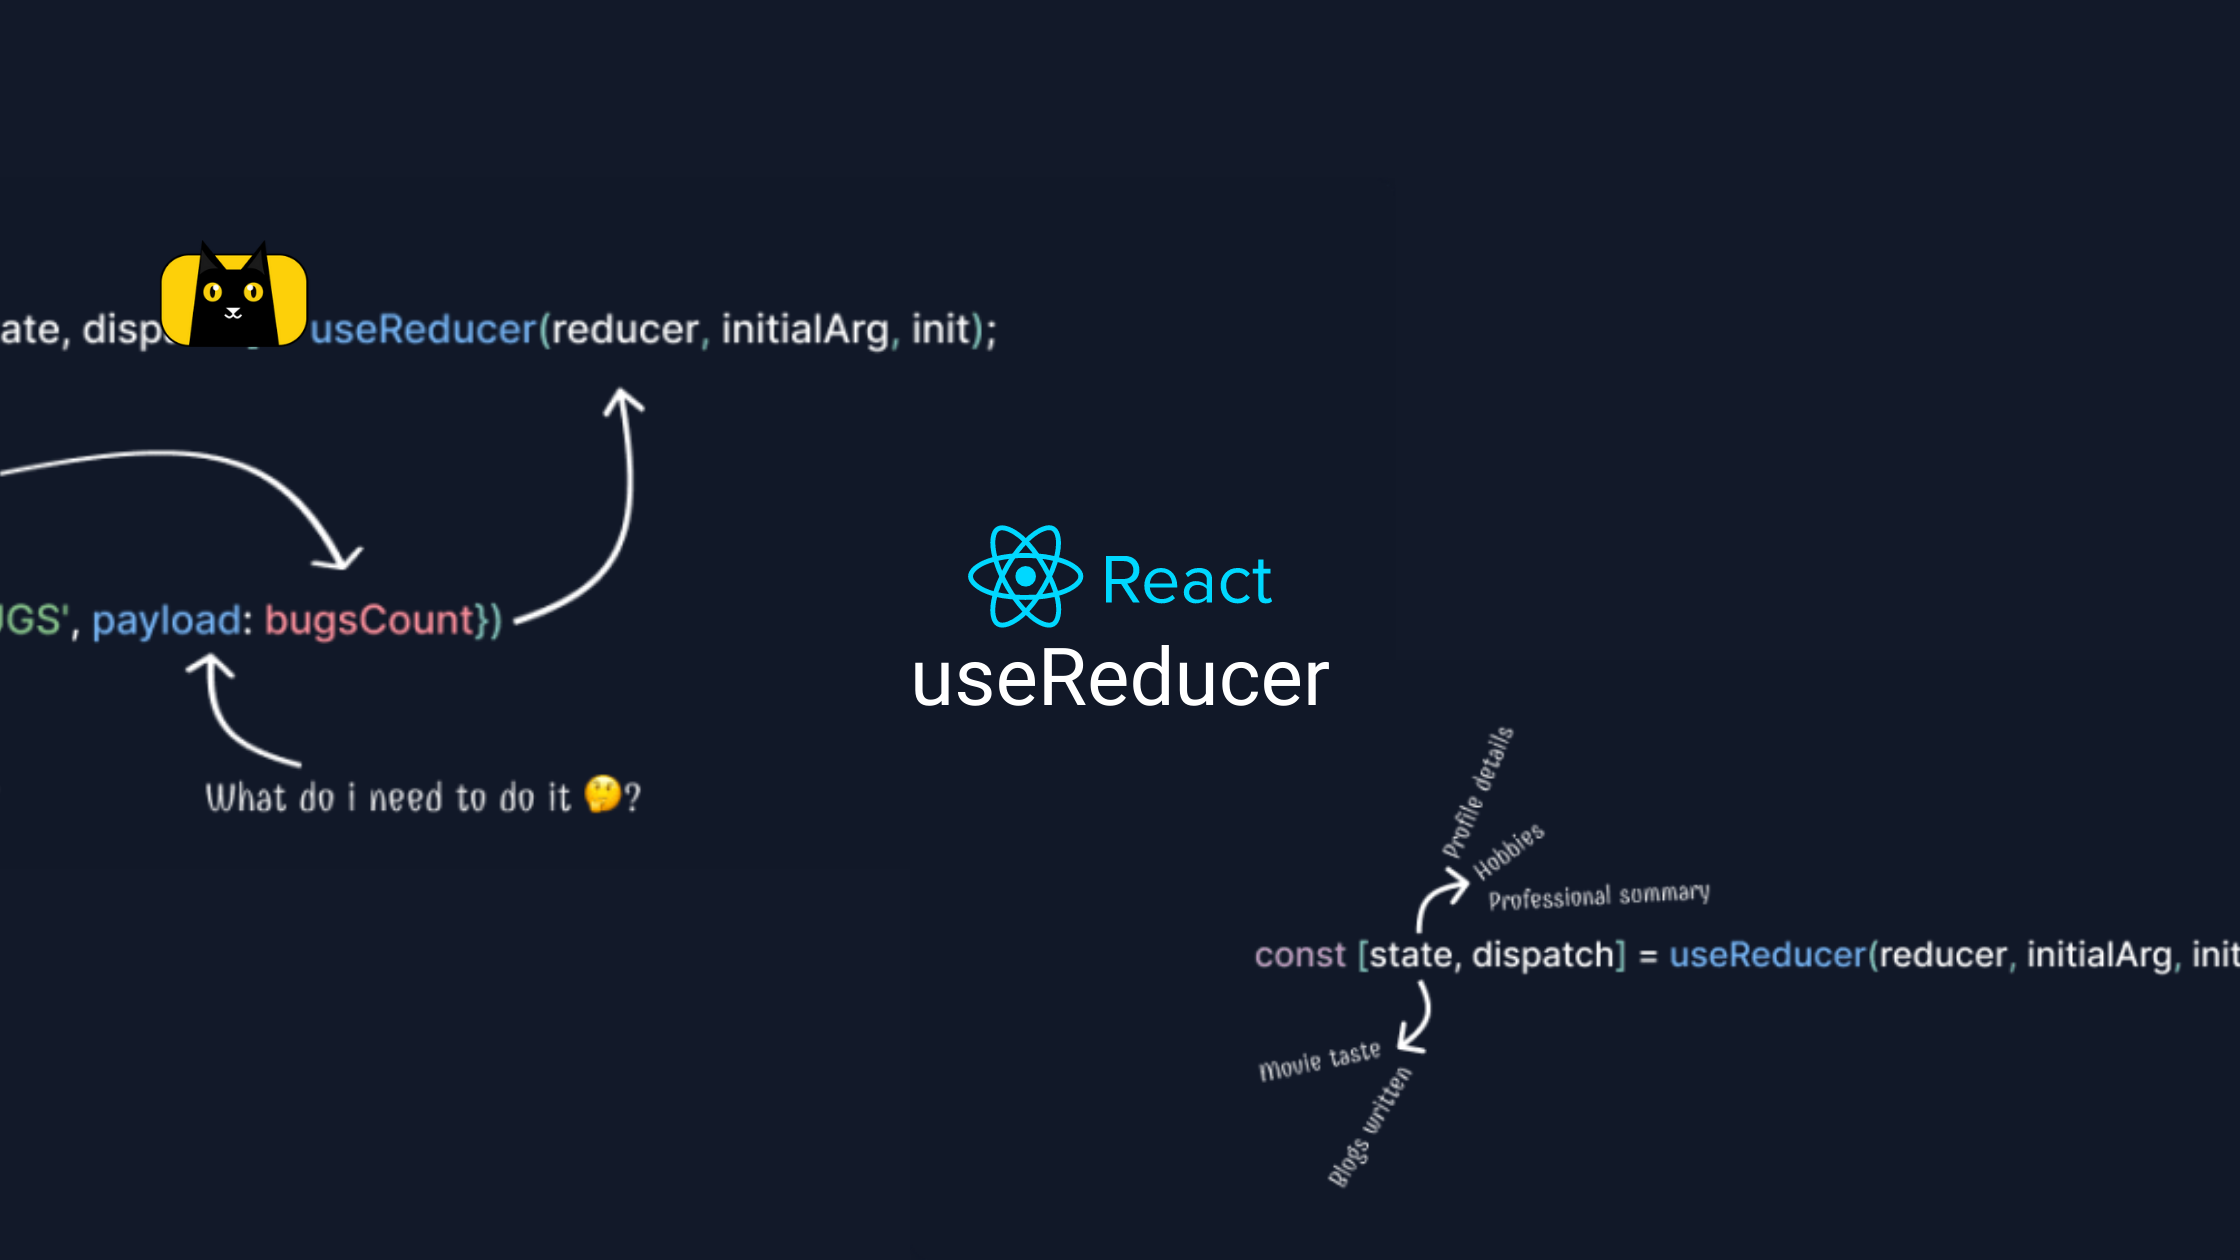 A picture of useReducer code, a React logo, and a CopyCat logo.